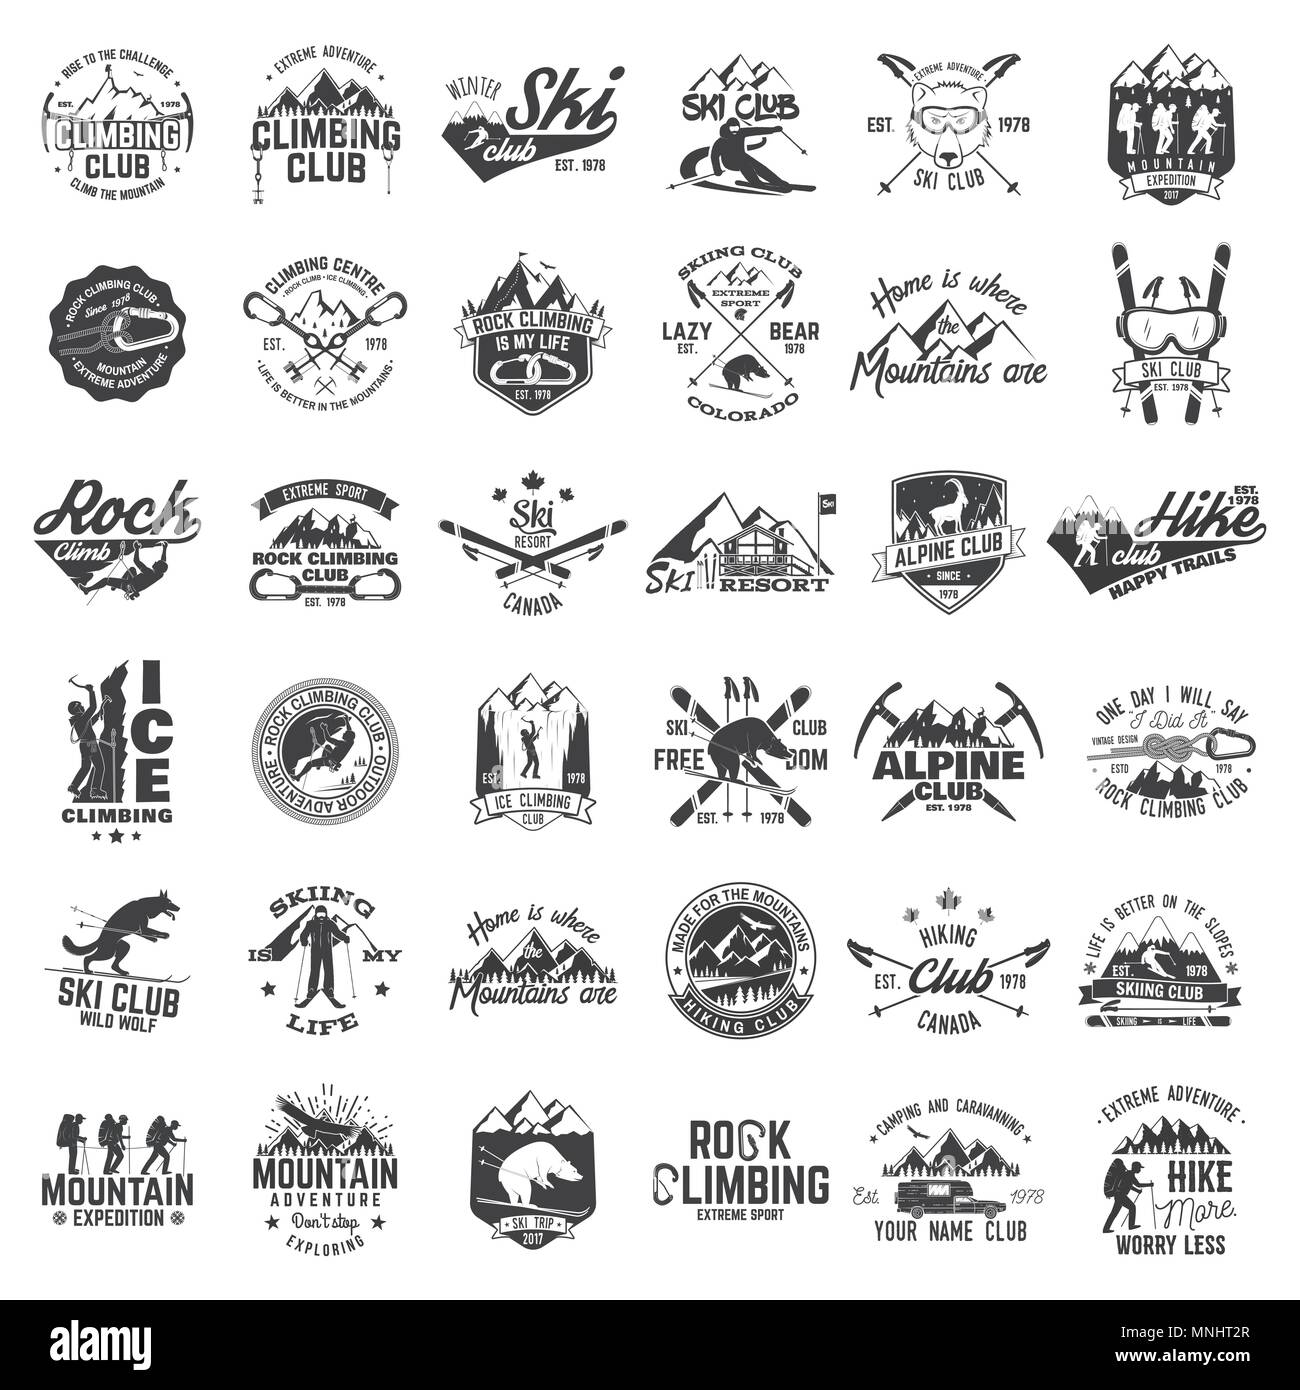 Rock and ice climbing,skiing, alpine and hiking club. Vector illustration. Set of vintage badges, labels, logos, silhouettes. Vintage typography colle Stock Vector